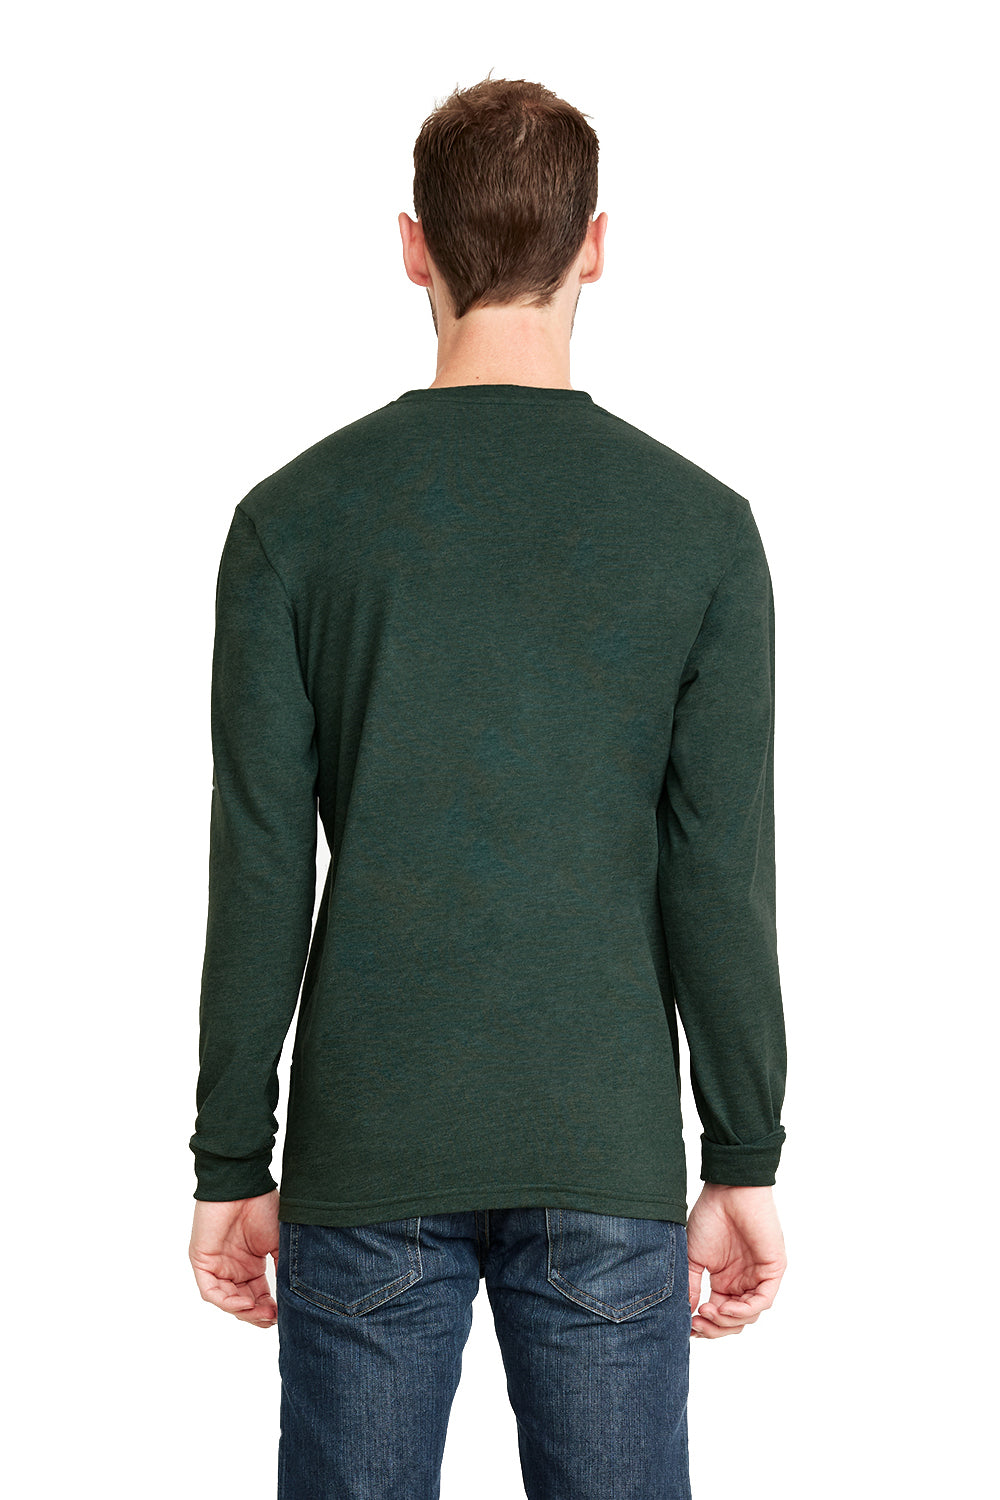 Next Level 6411 Mens Sueded Jersey Long Sleeve Crewneck T-Shirt Heather Forest Green Back